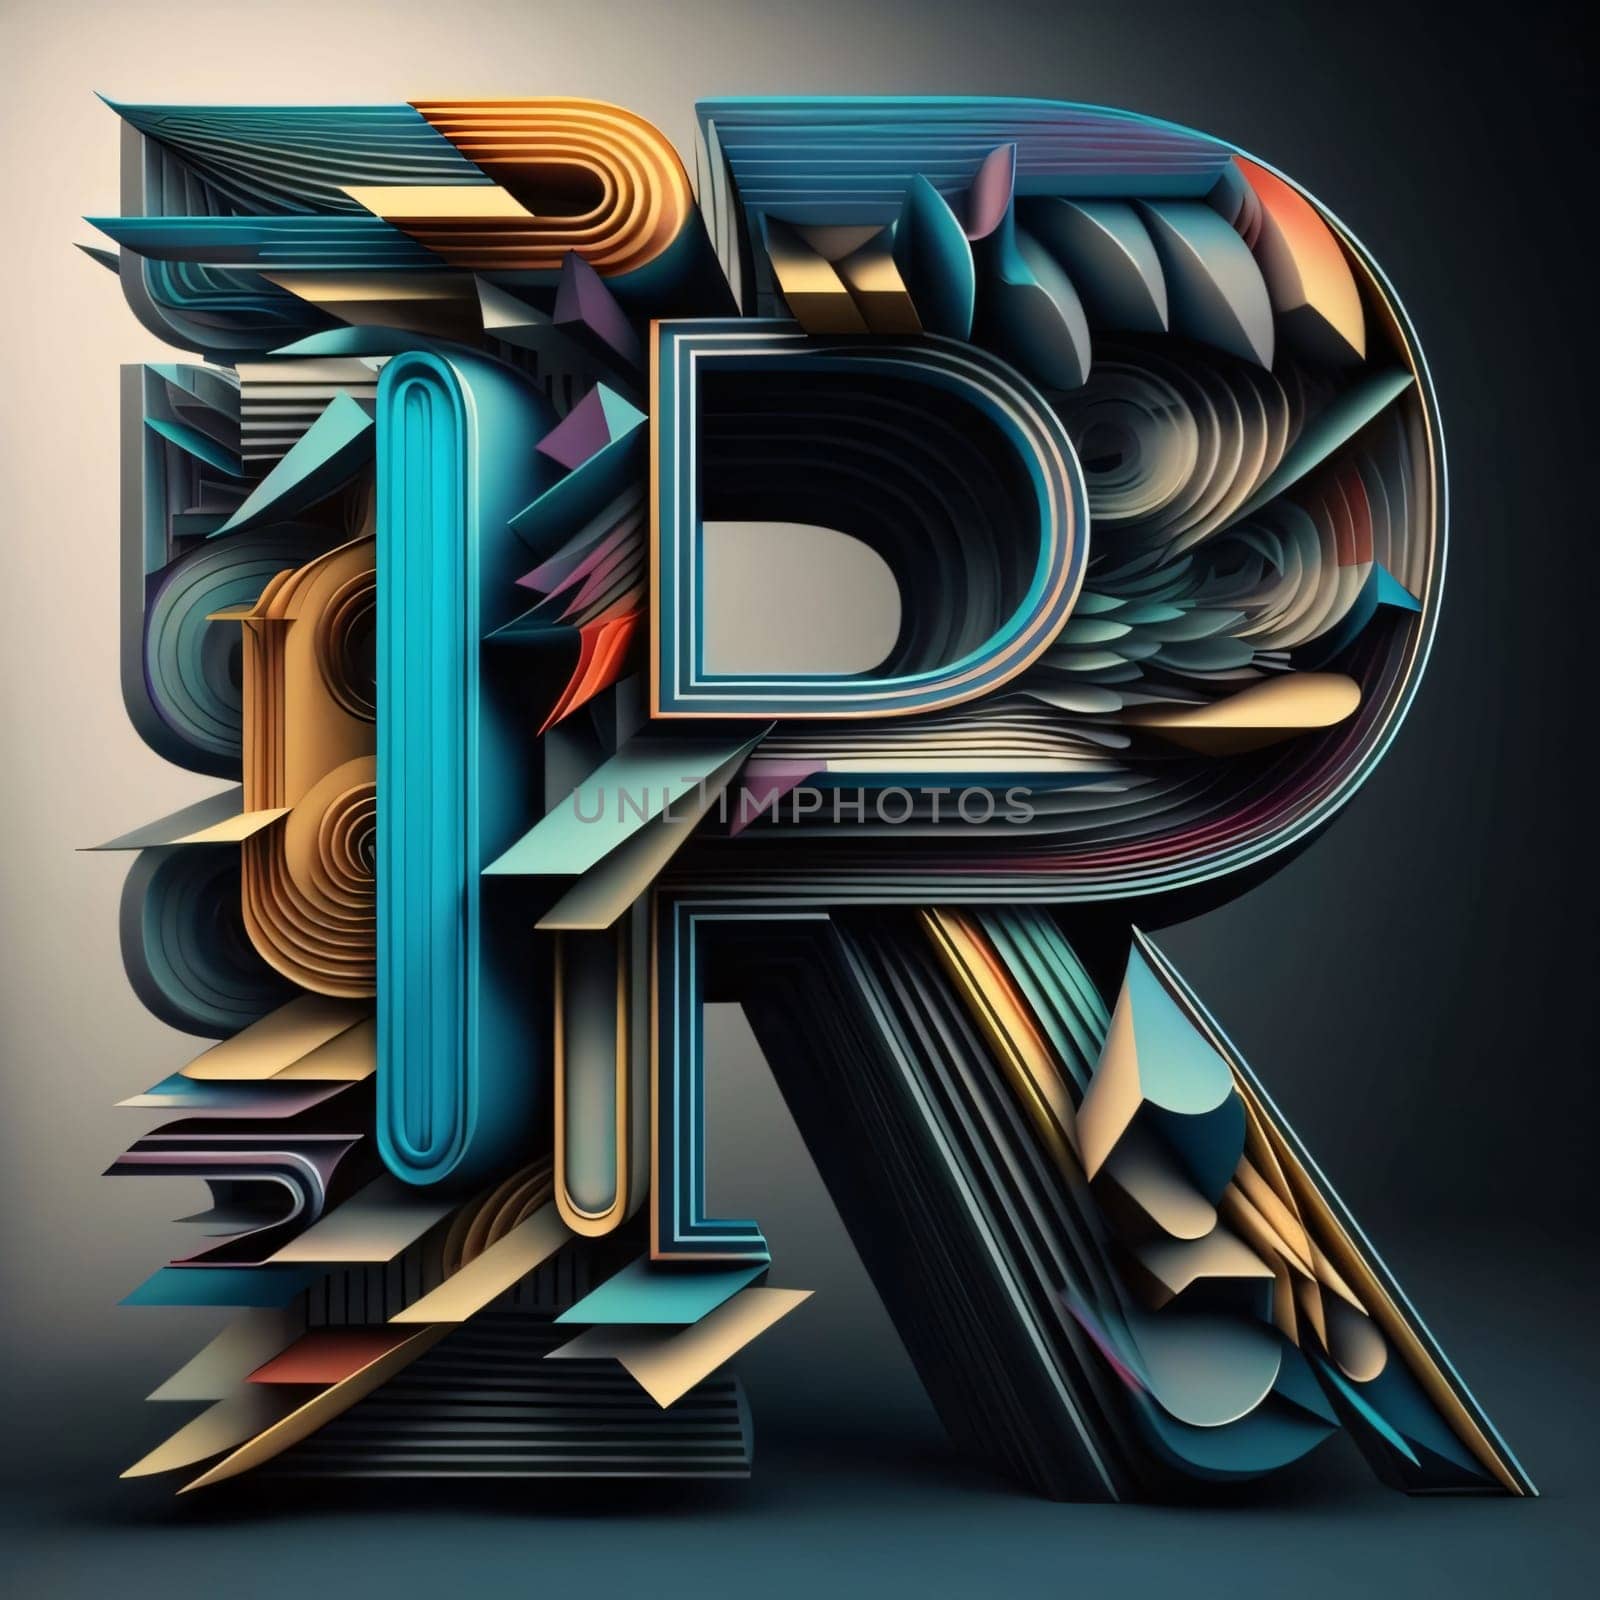 Graphic alphabet letters: 3D render, 3D illustration, letter R. Geometric abstract background.